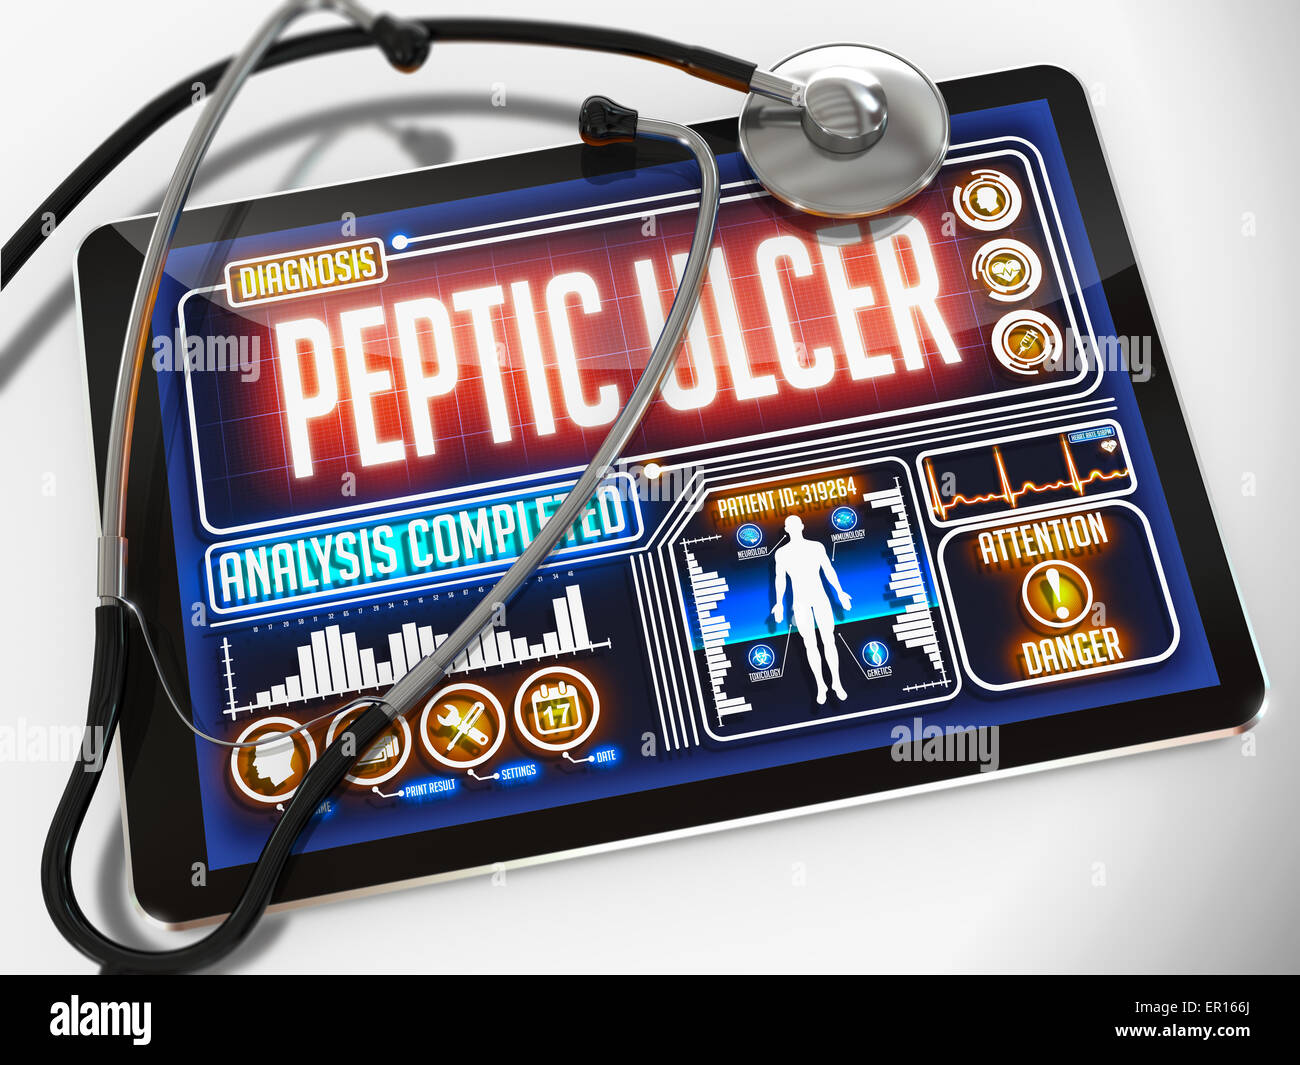 Peptic Ulcer on the Display of Medical Tablet. Stock Photo